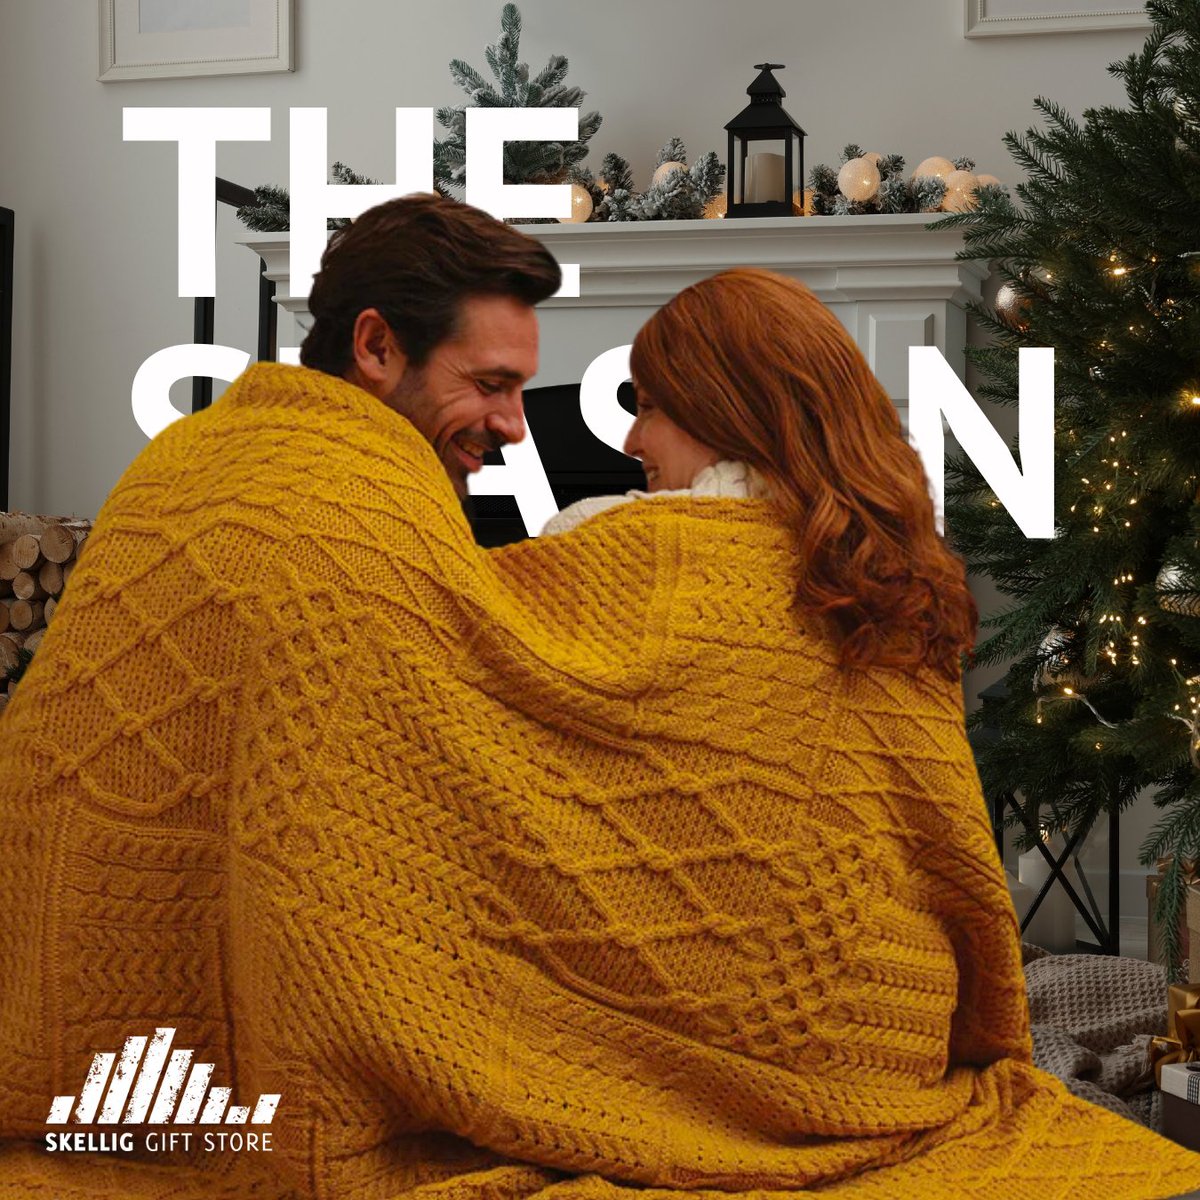 'Tis the season for cuddles and cosiness 🙌🏻 Skellig Gift Store has over 300 beautiful, handknit blankets and throws that are sure to bring the comfort to your cosy Christmas nights 💚

#IrishGifts #Blankets #Throws #AranBlanket